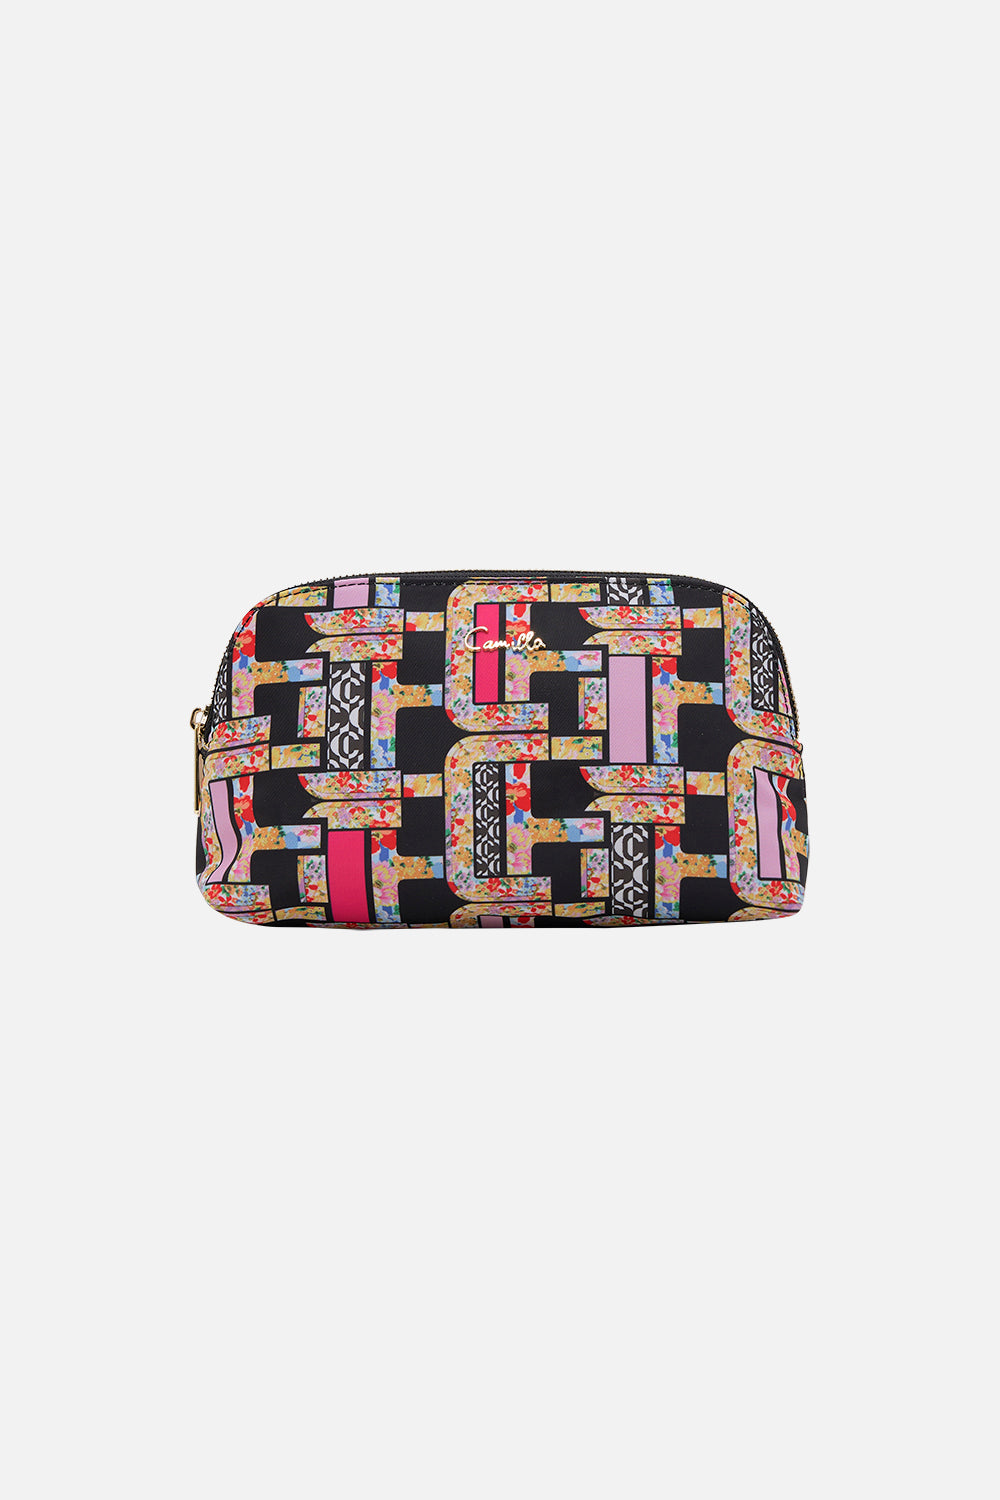 Product view of CAMILLA cosmetic case in Signora Milano print